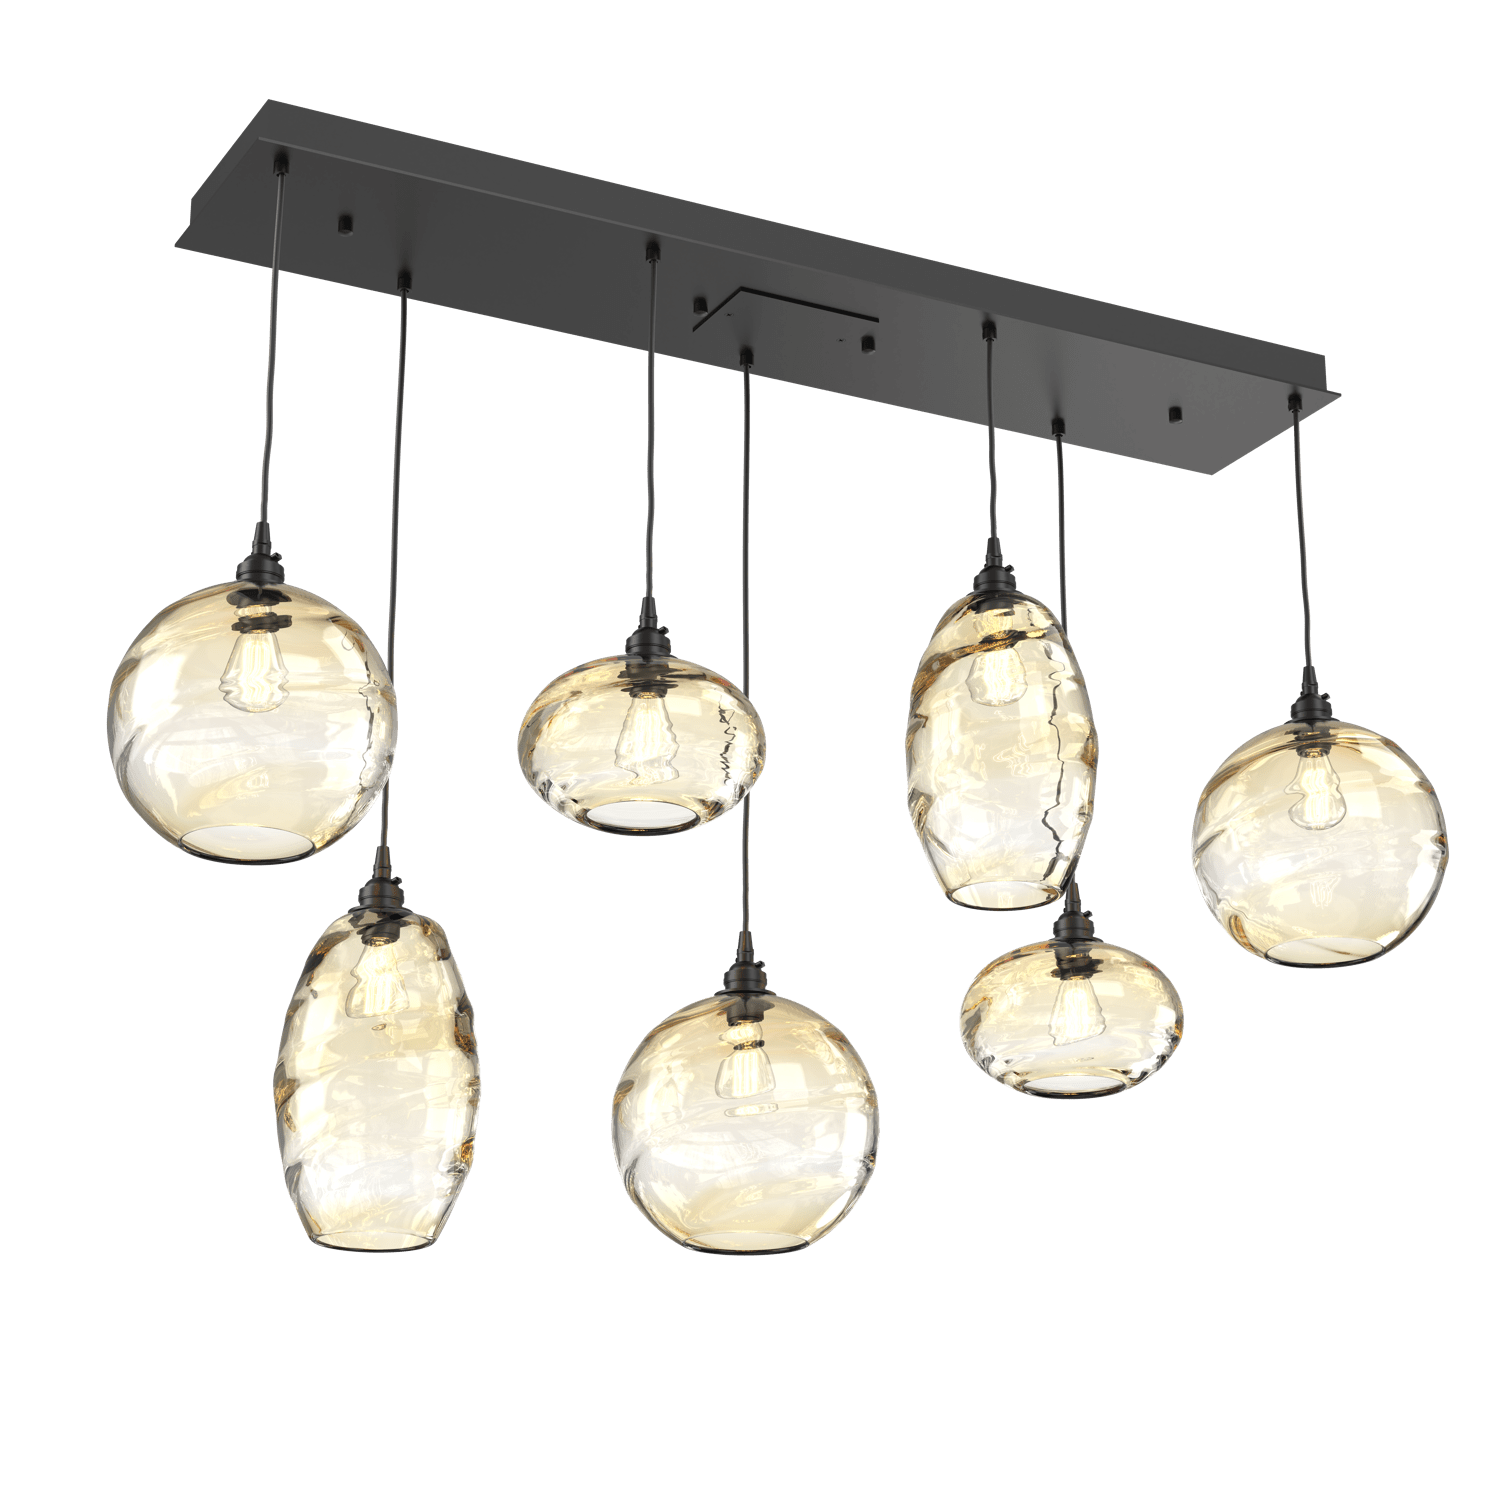 PLB0048-07-MB-OA-Hammerton-Studio-Optic-Blown-Glass-Misto-7-light-linear-pendant-chandelier-with-matte-black-finish-and-optic-amber-blown-glass-shades-and-incandescent-lamping